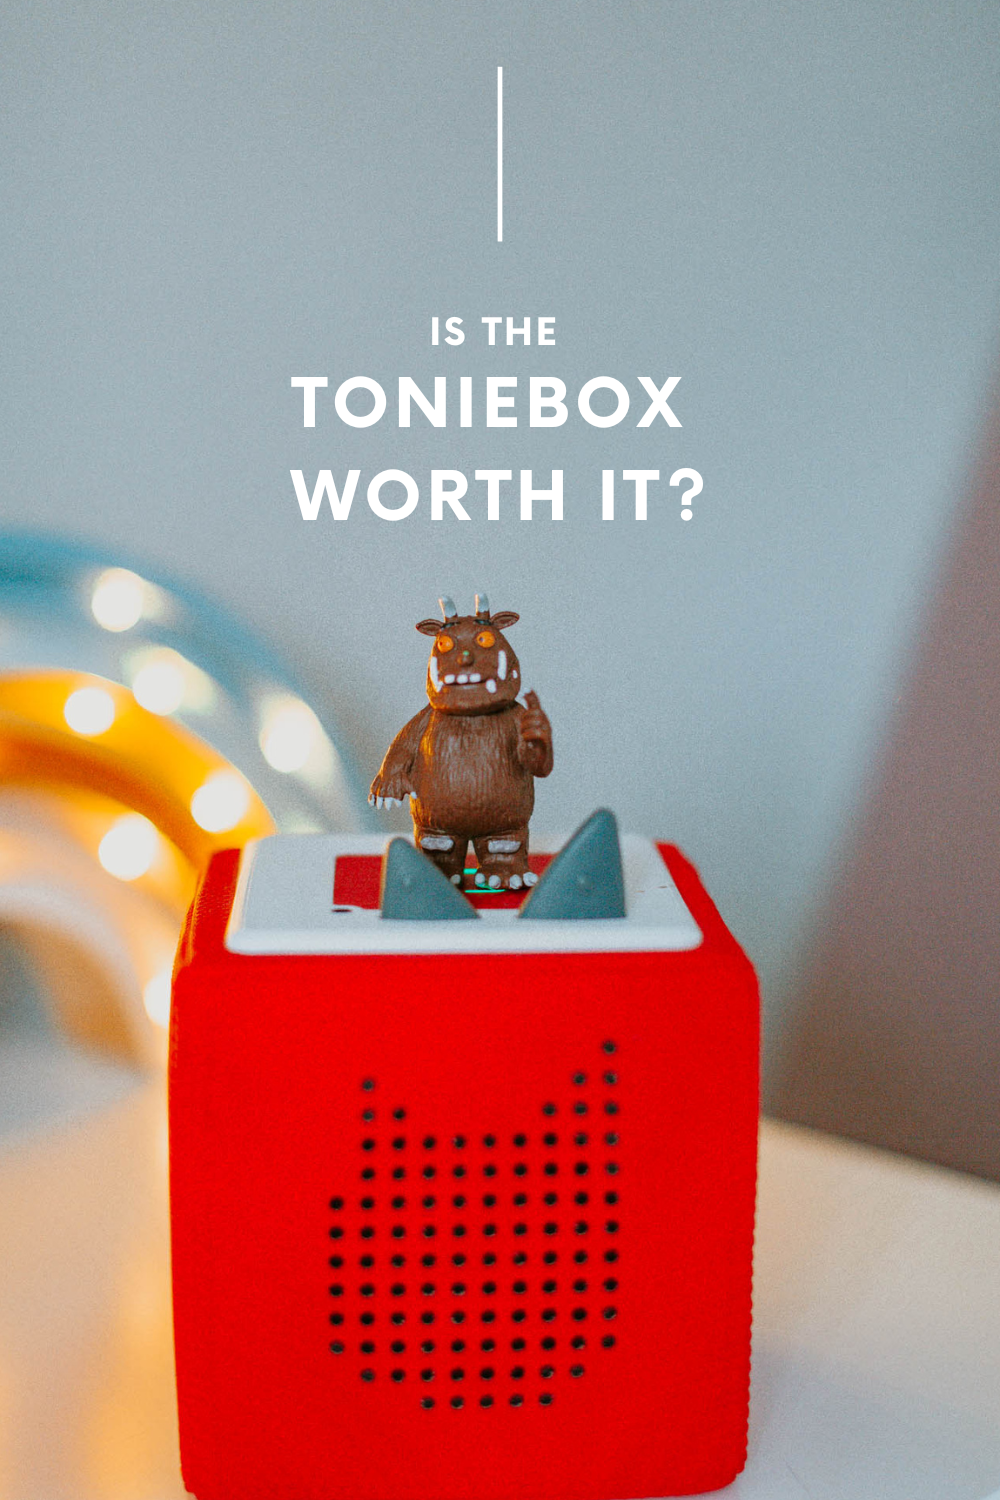 Toniebox Review 2023: Is the Toniebox Worth It?